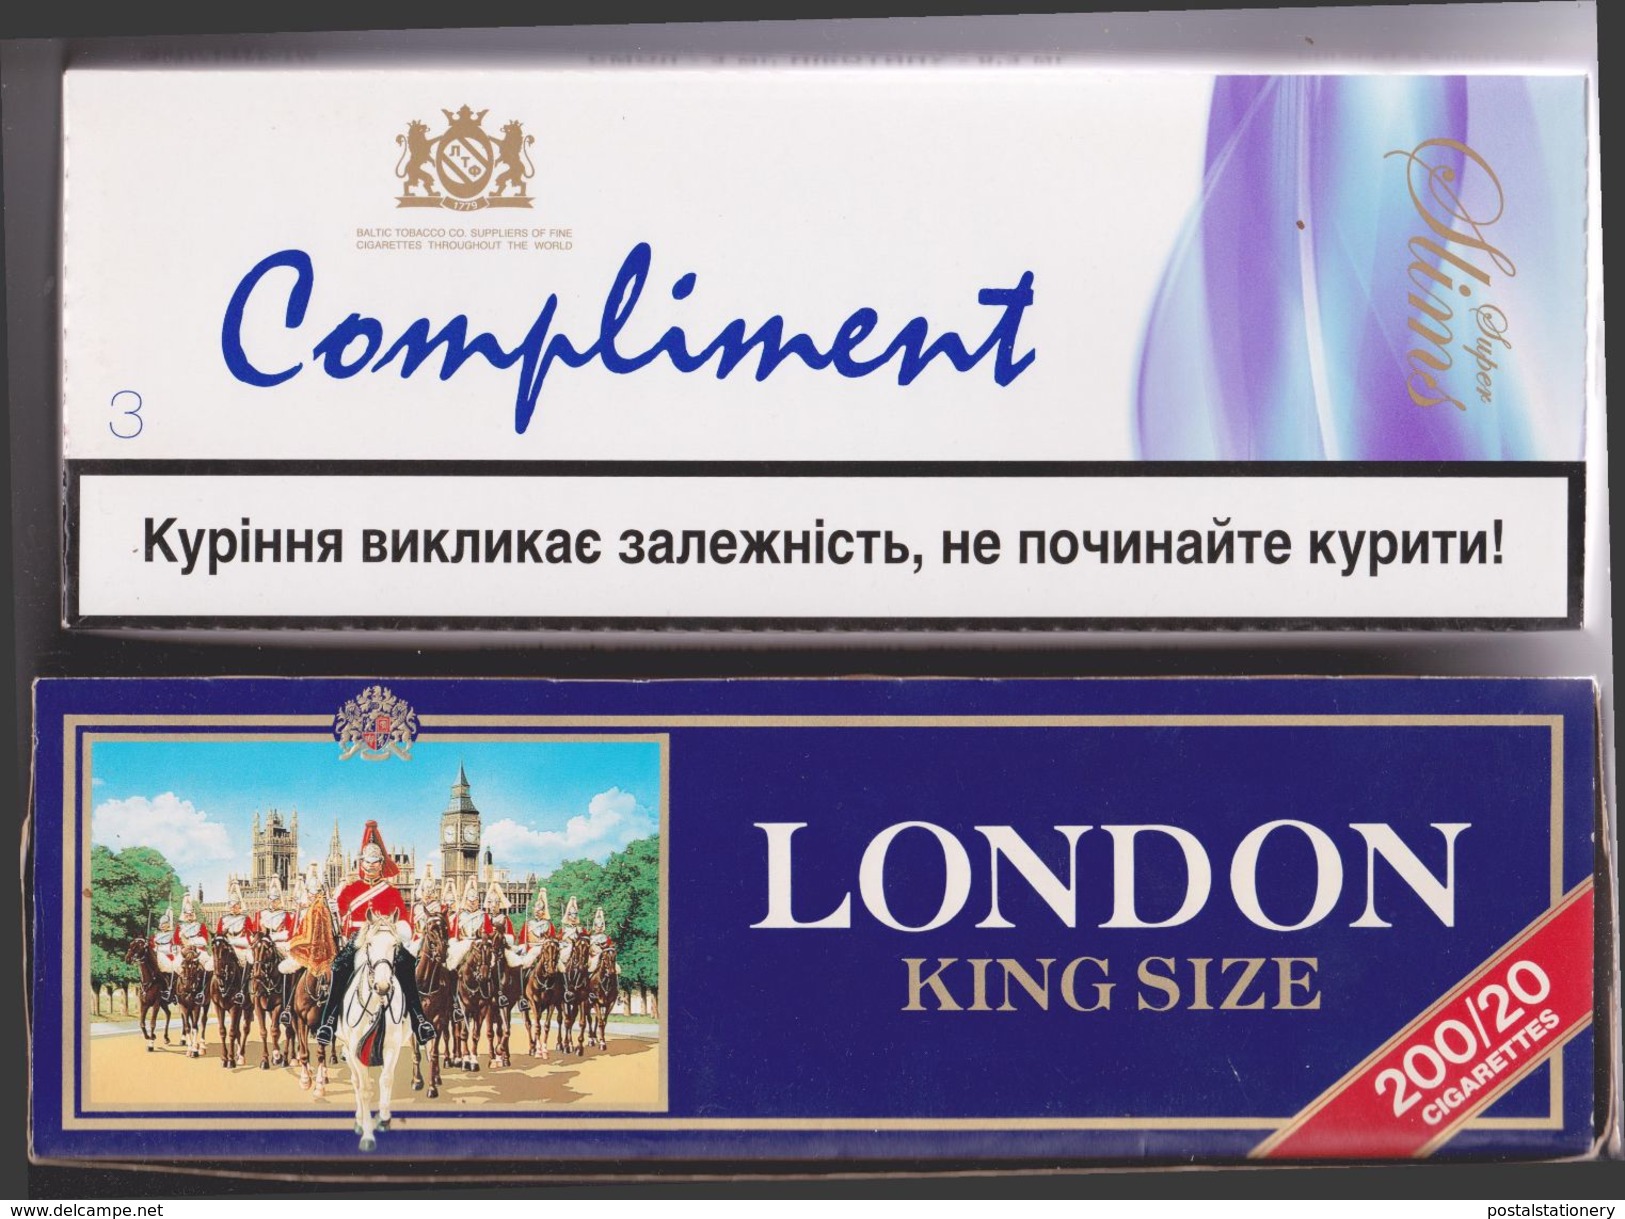 Worldwide USSR Ukraine Russia 1980's-2000's Empty Cigarette Packs Boxes Blocks Collection Set of 75 items at 35 cents ea